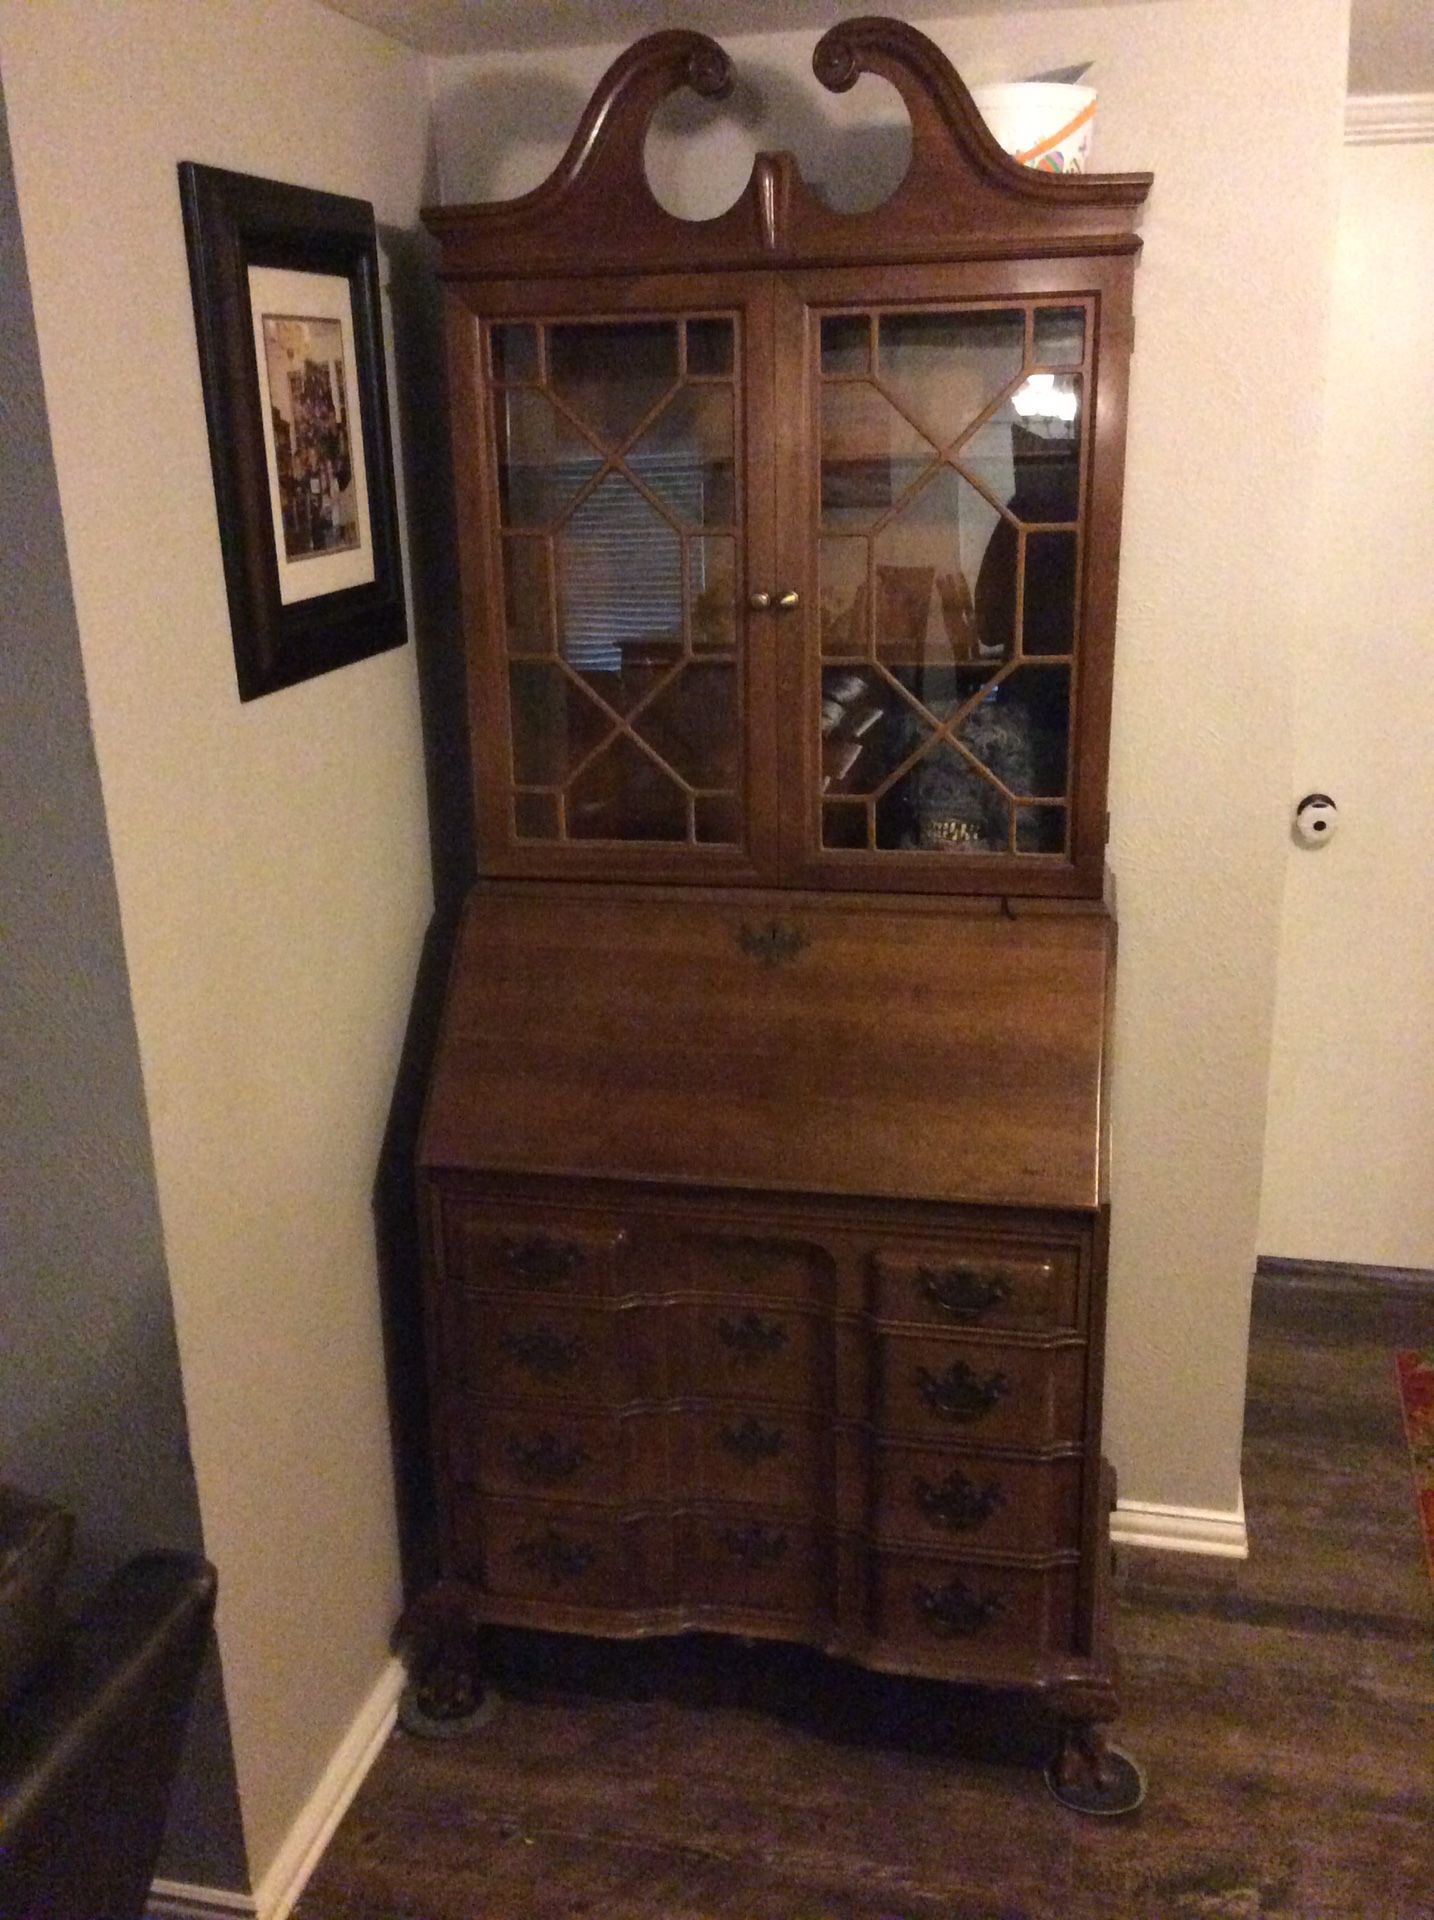 Secretary desk for sale. 32wide 18 deep 6’9 inches tall